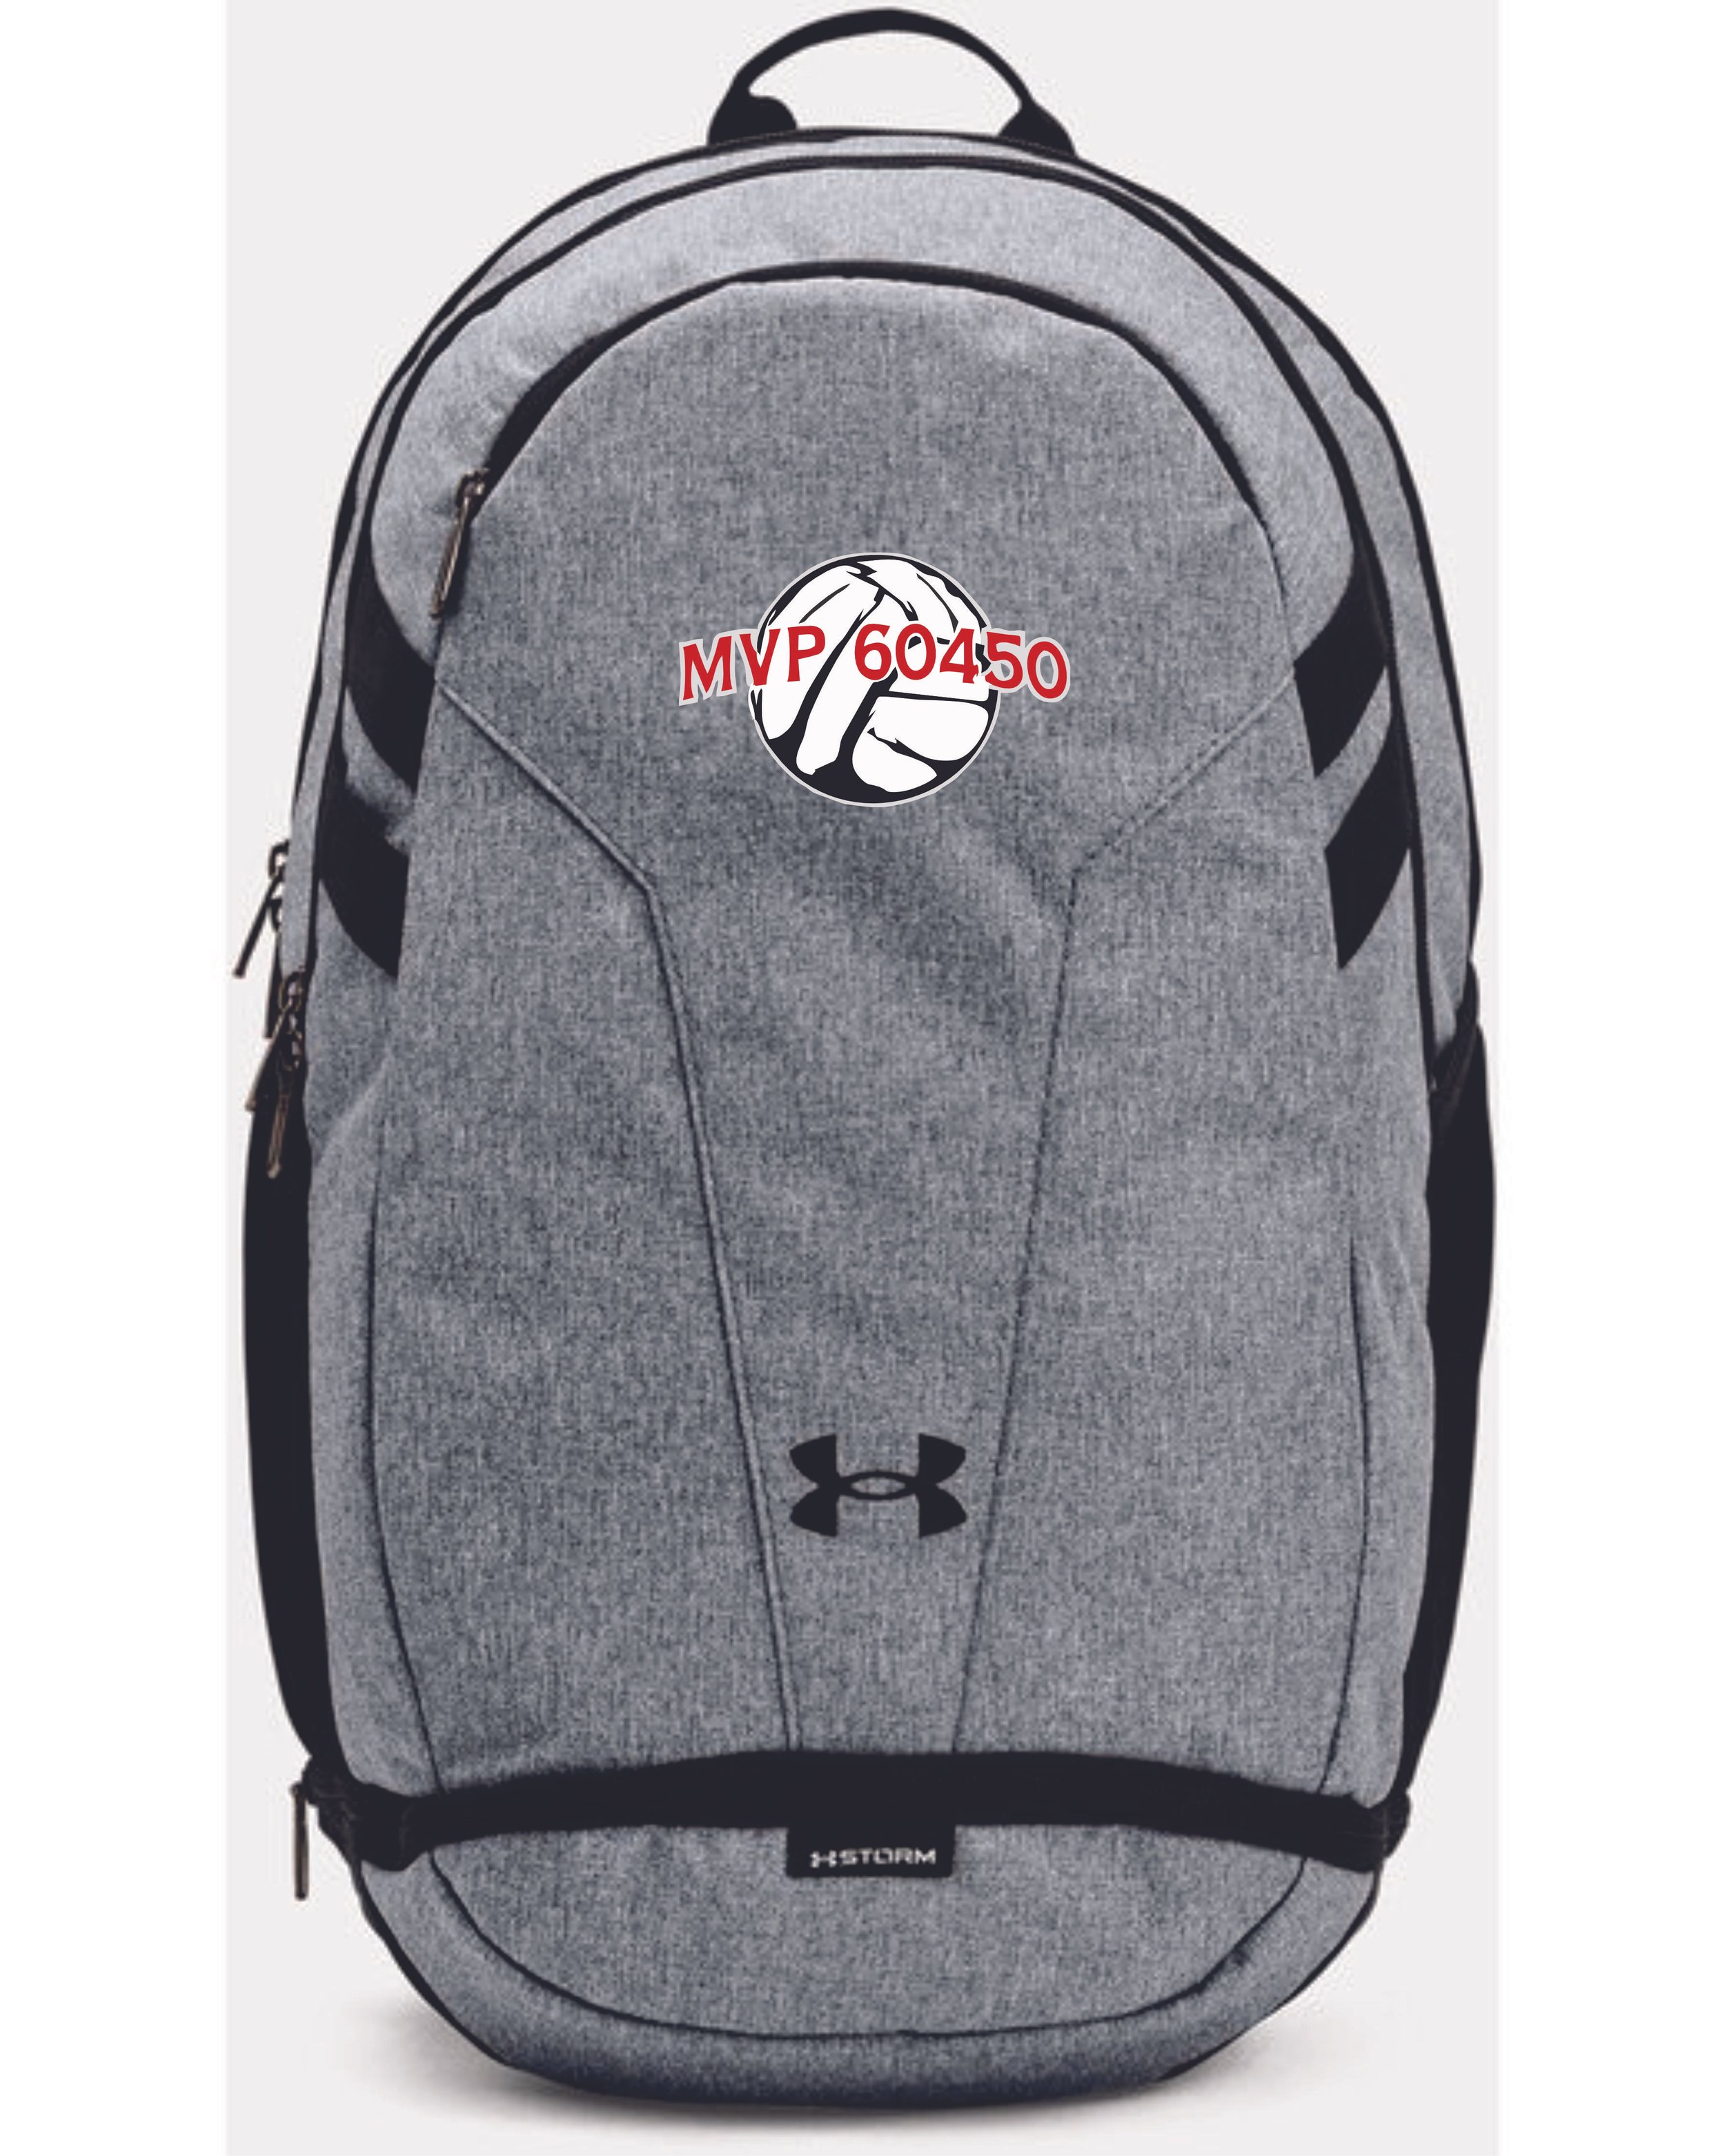 Under Armour Unisex Hustle II Backpack | Mighty Mites Awards